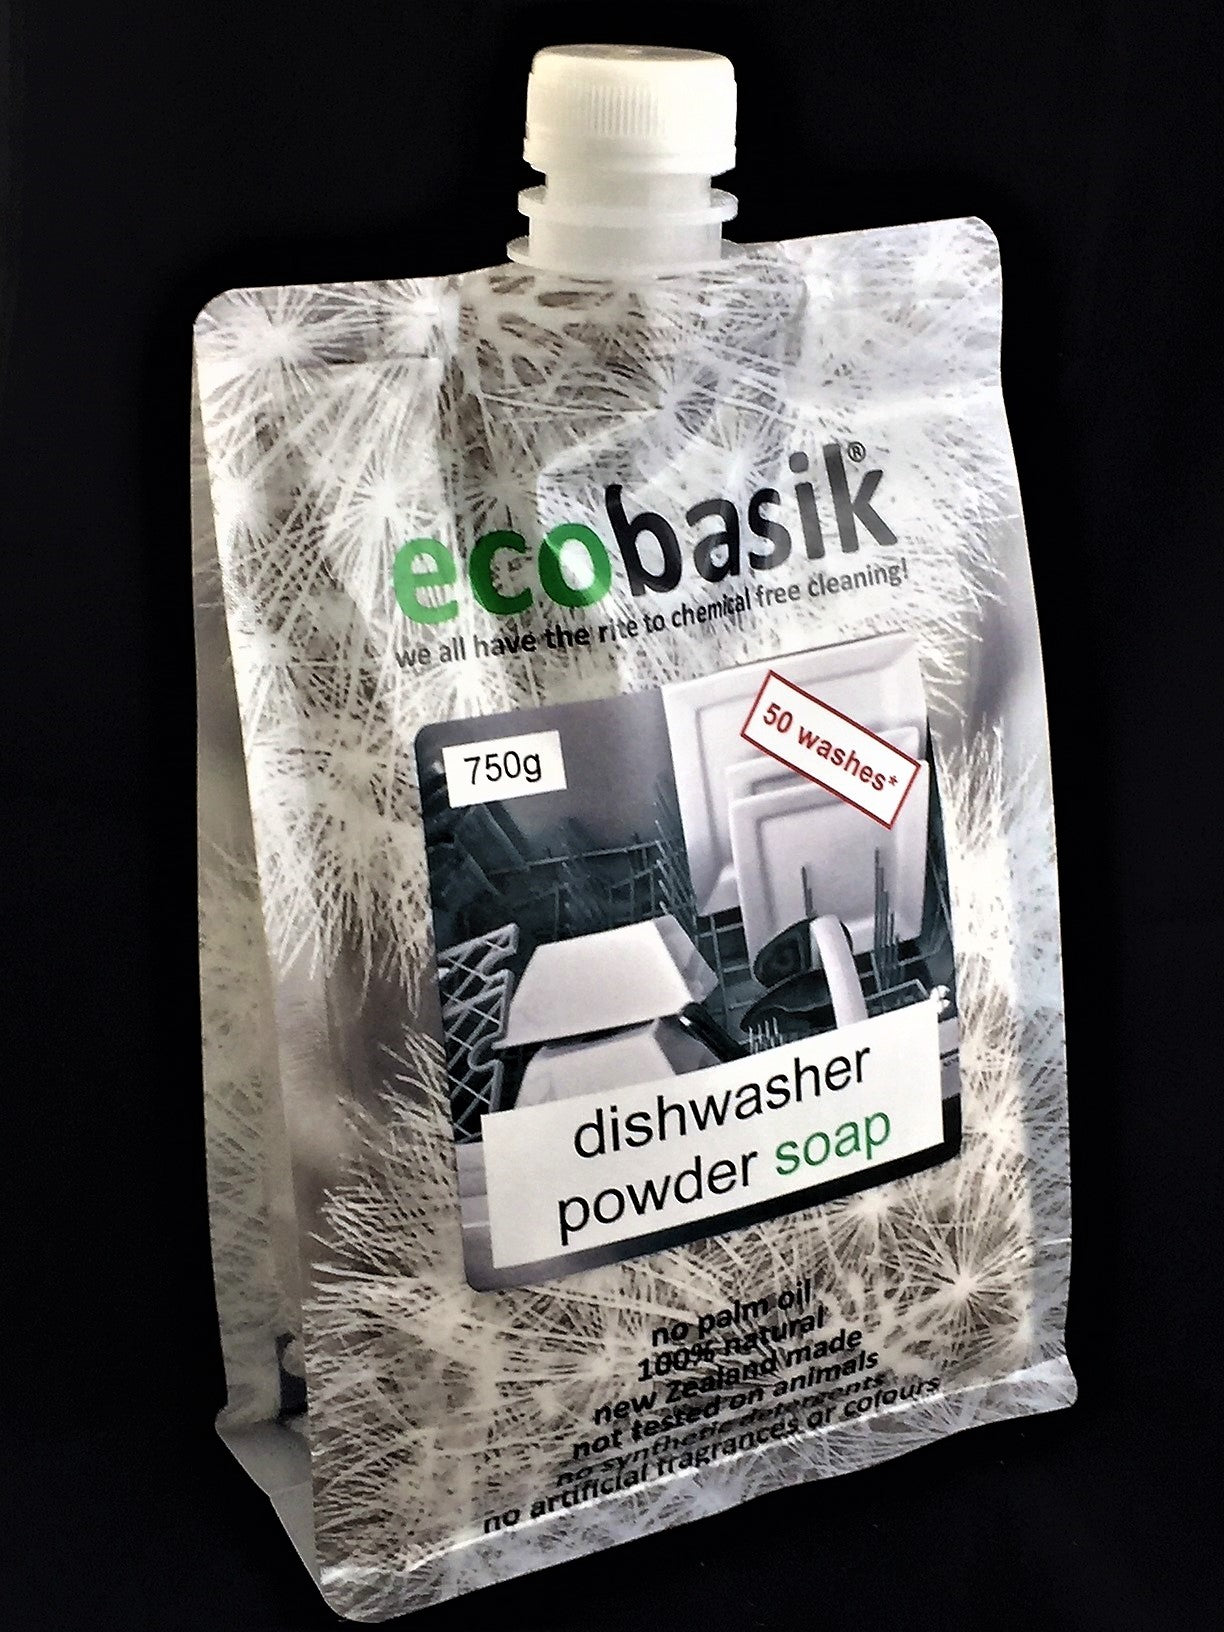 ecobasik - diswasher powder soap - SAFE cleaning for the home!